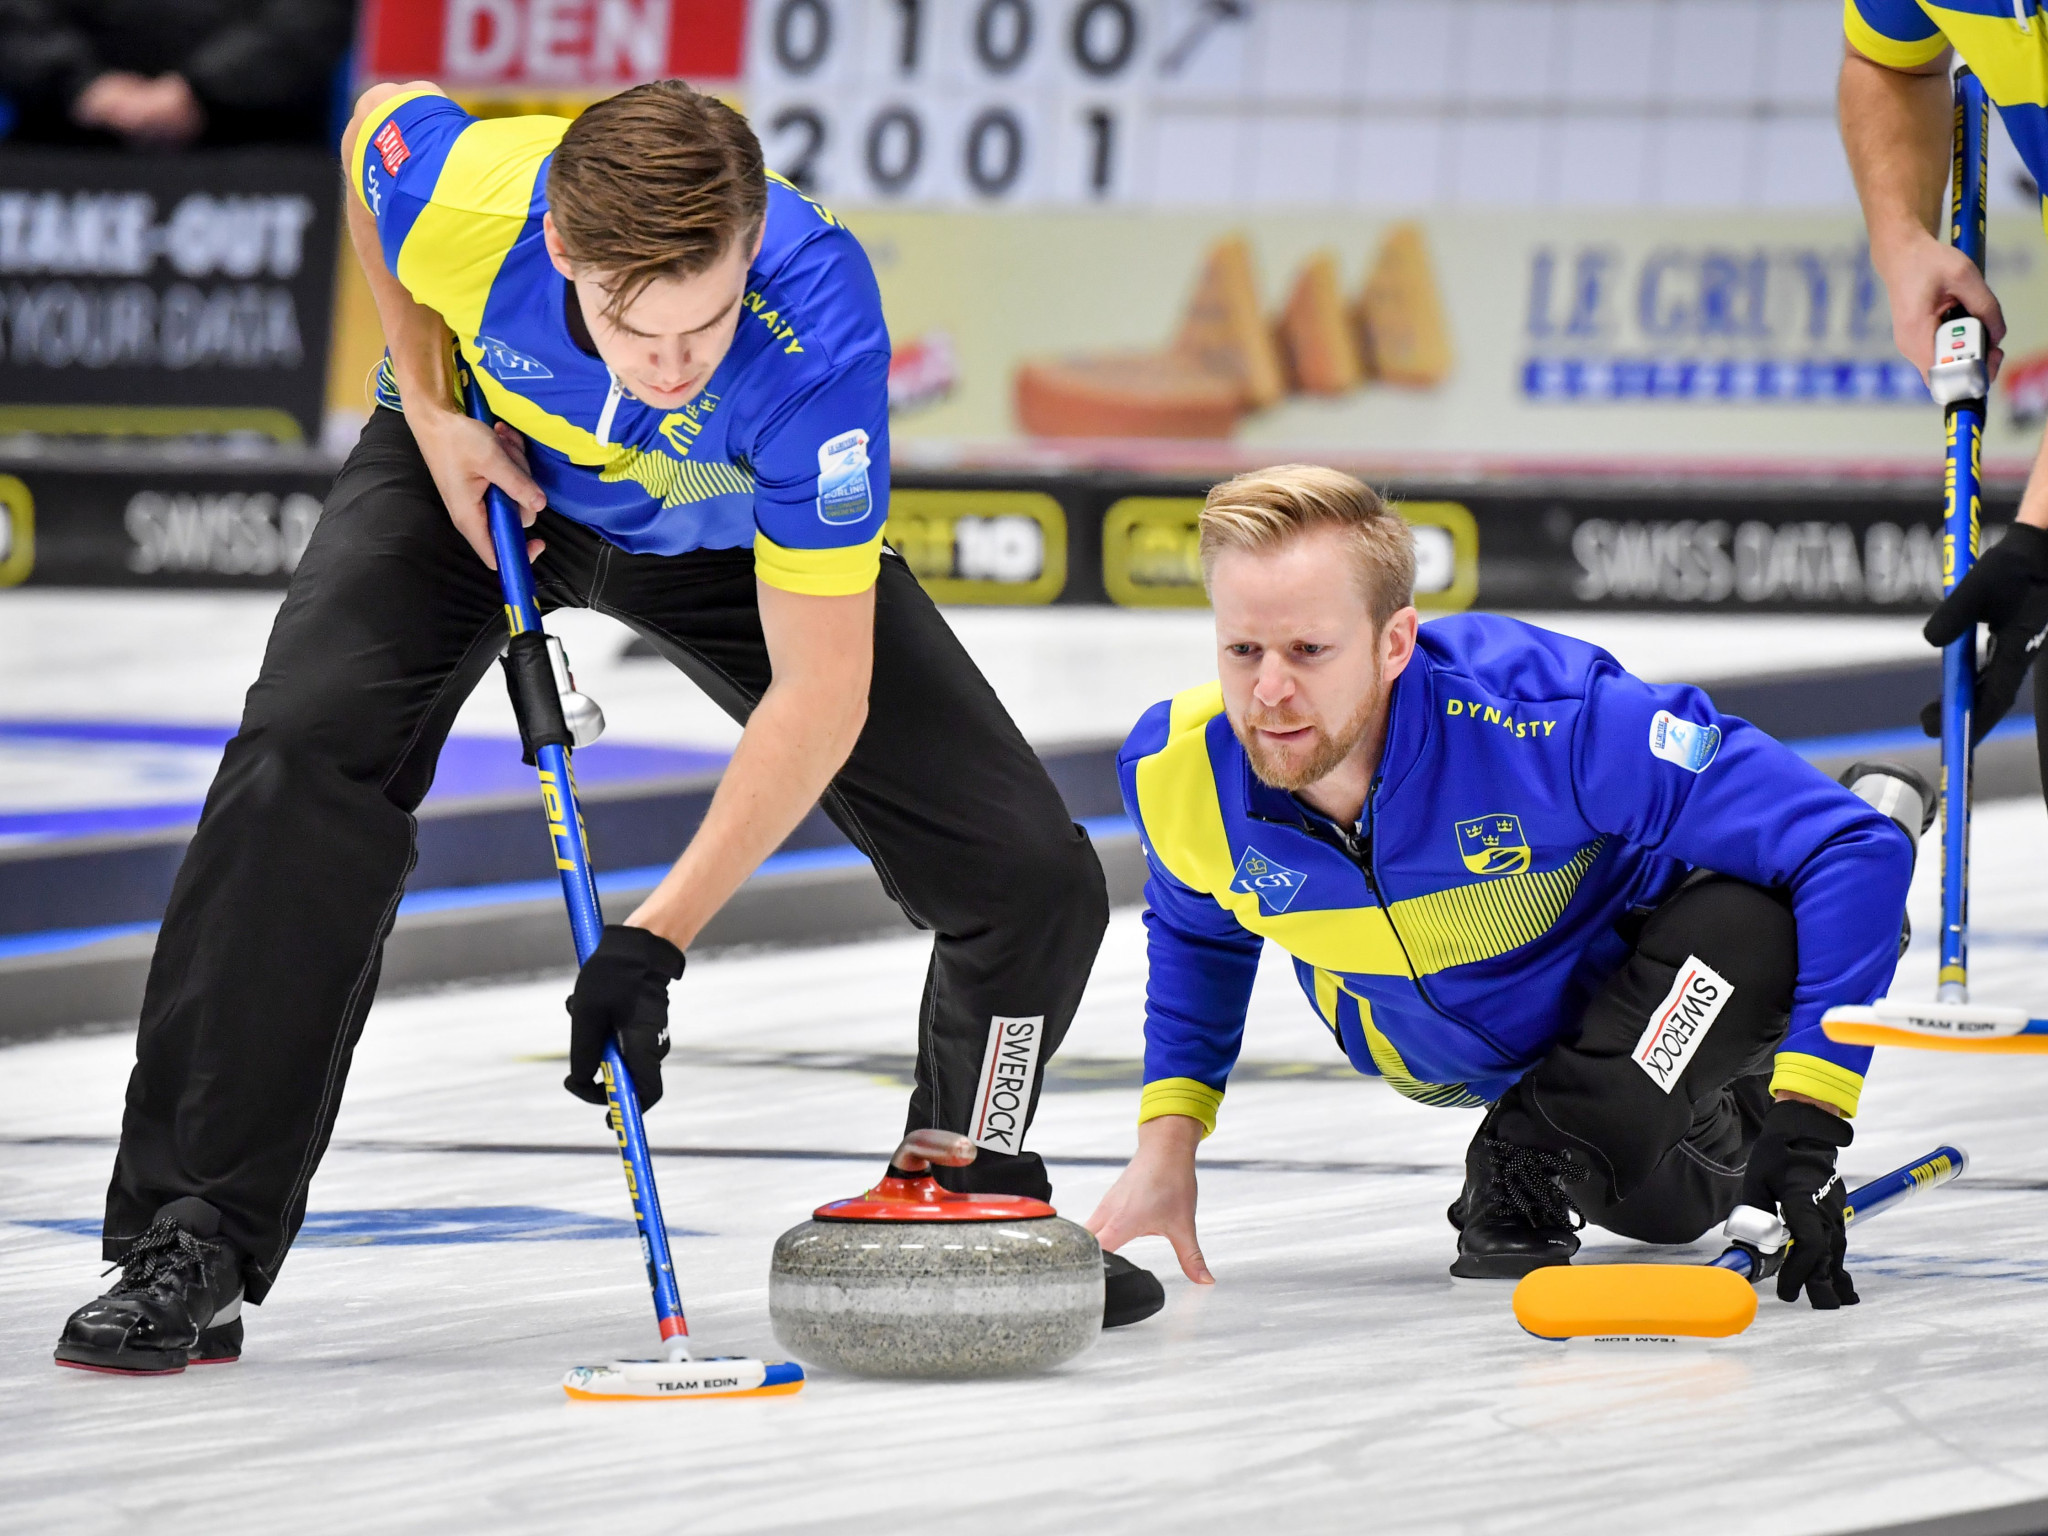 Niklas Edin's Sweden start as favourites for the World Championship starting tomorrow in Calgary ©Getty Images